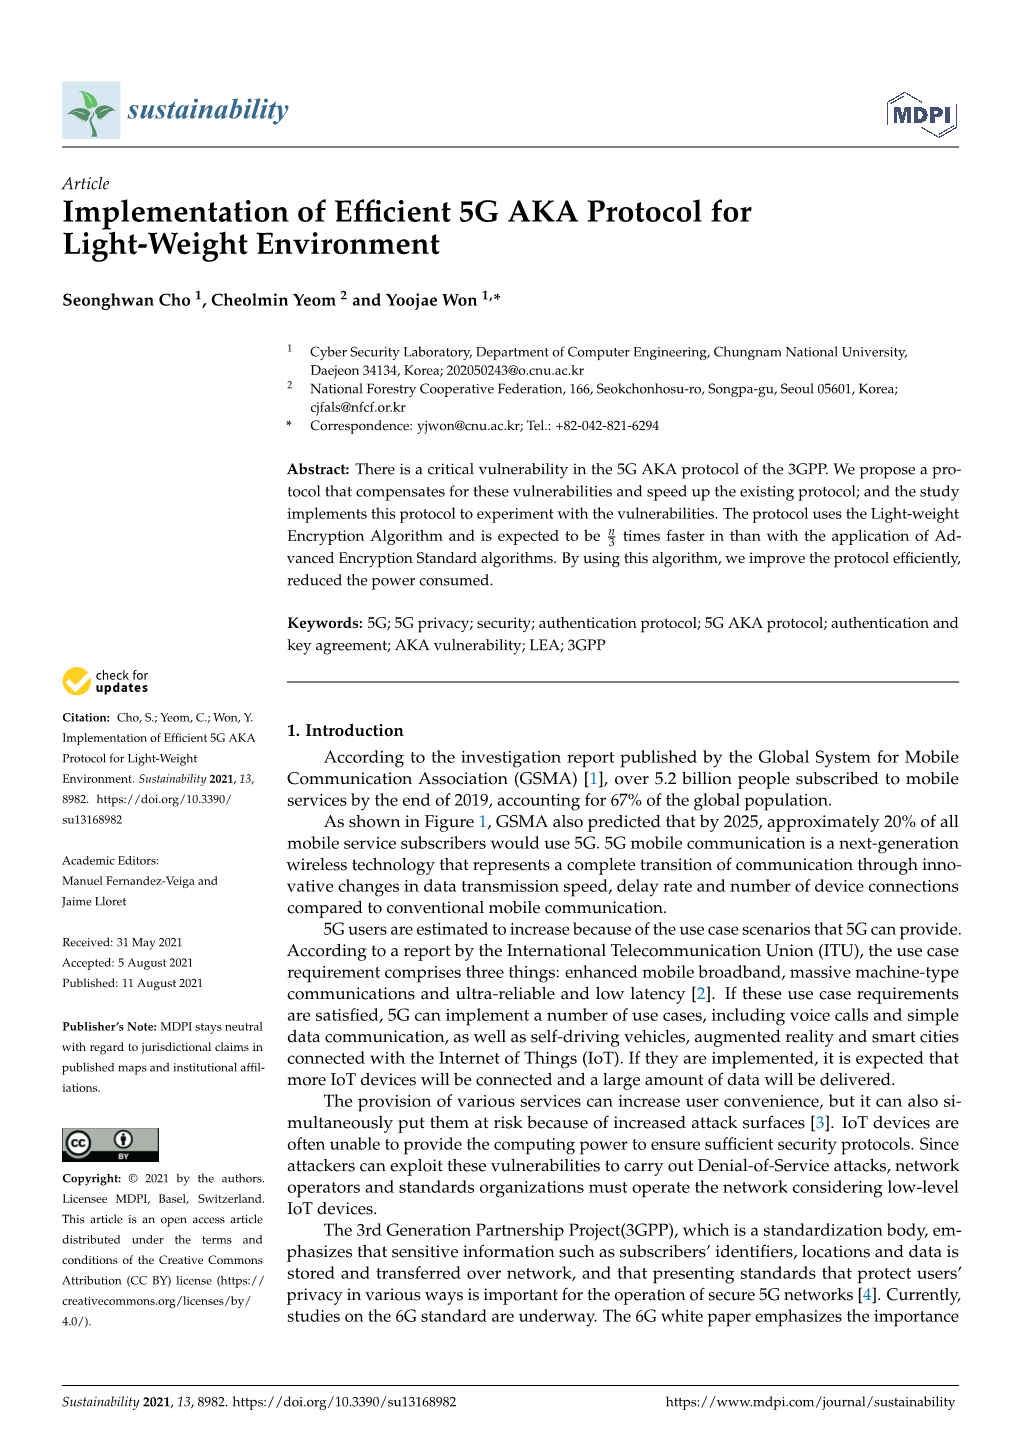 Implementation of Efficient 5G AKA Protocol for Light-Weight Environment